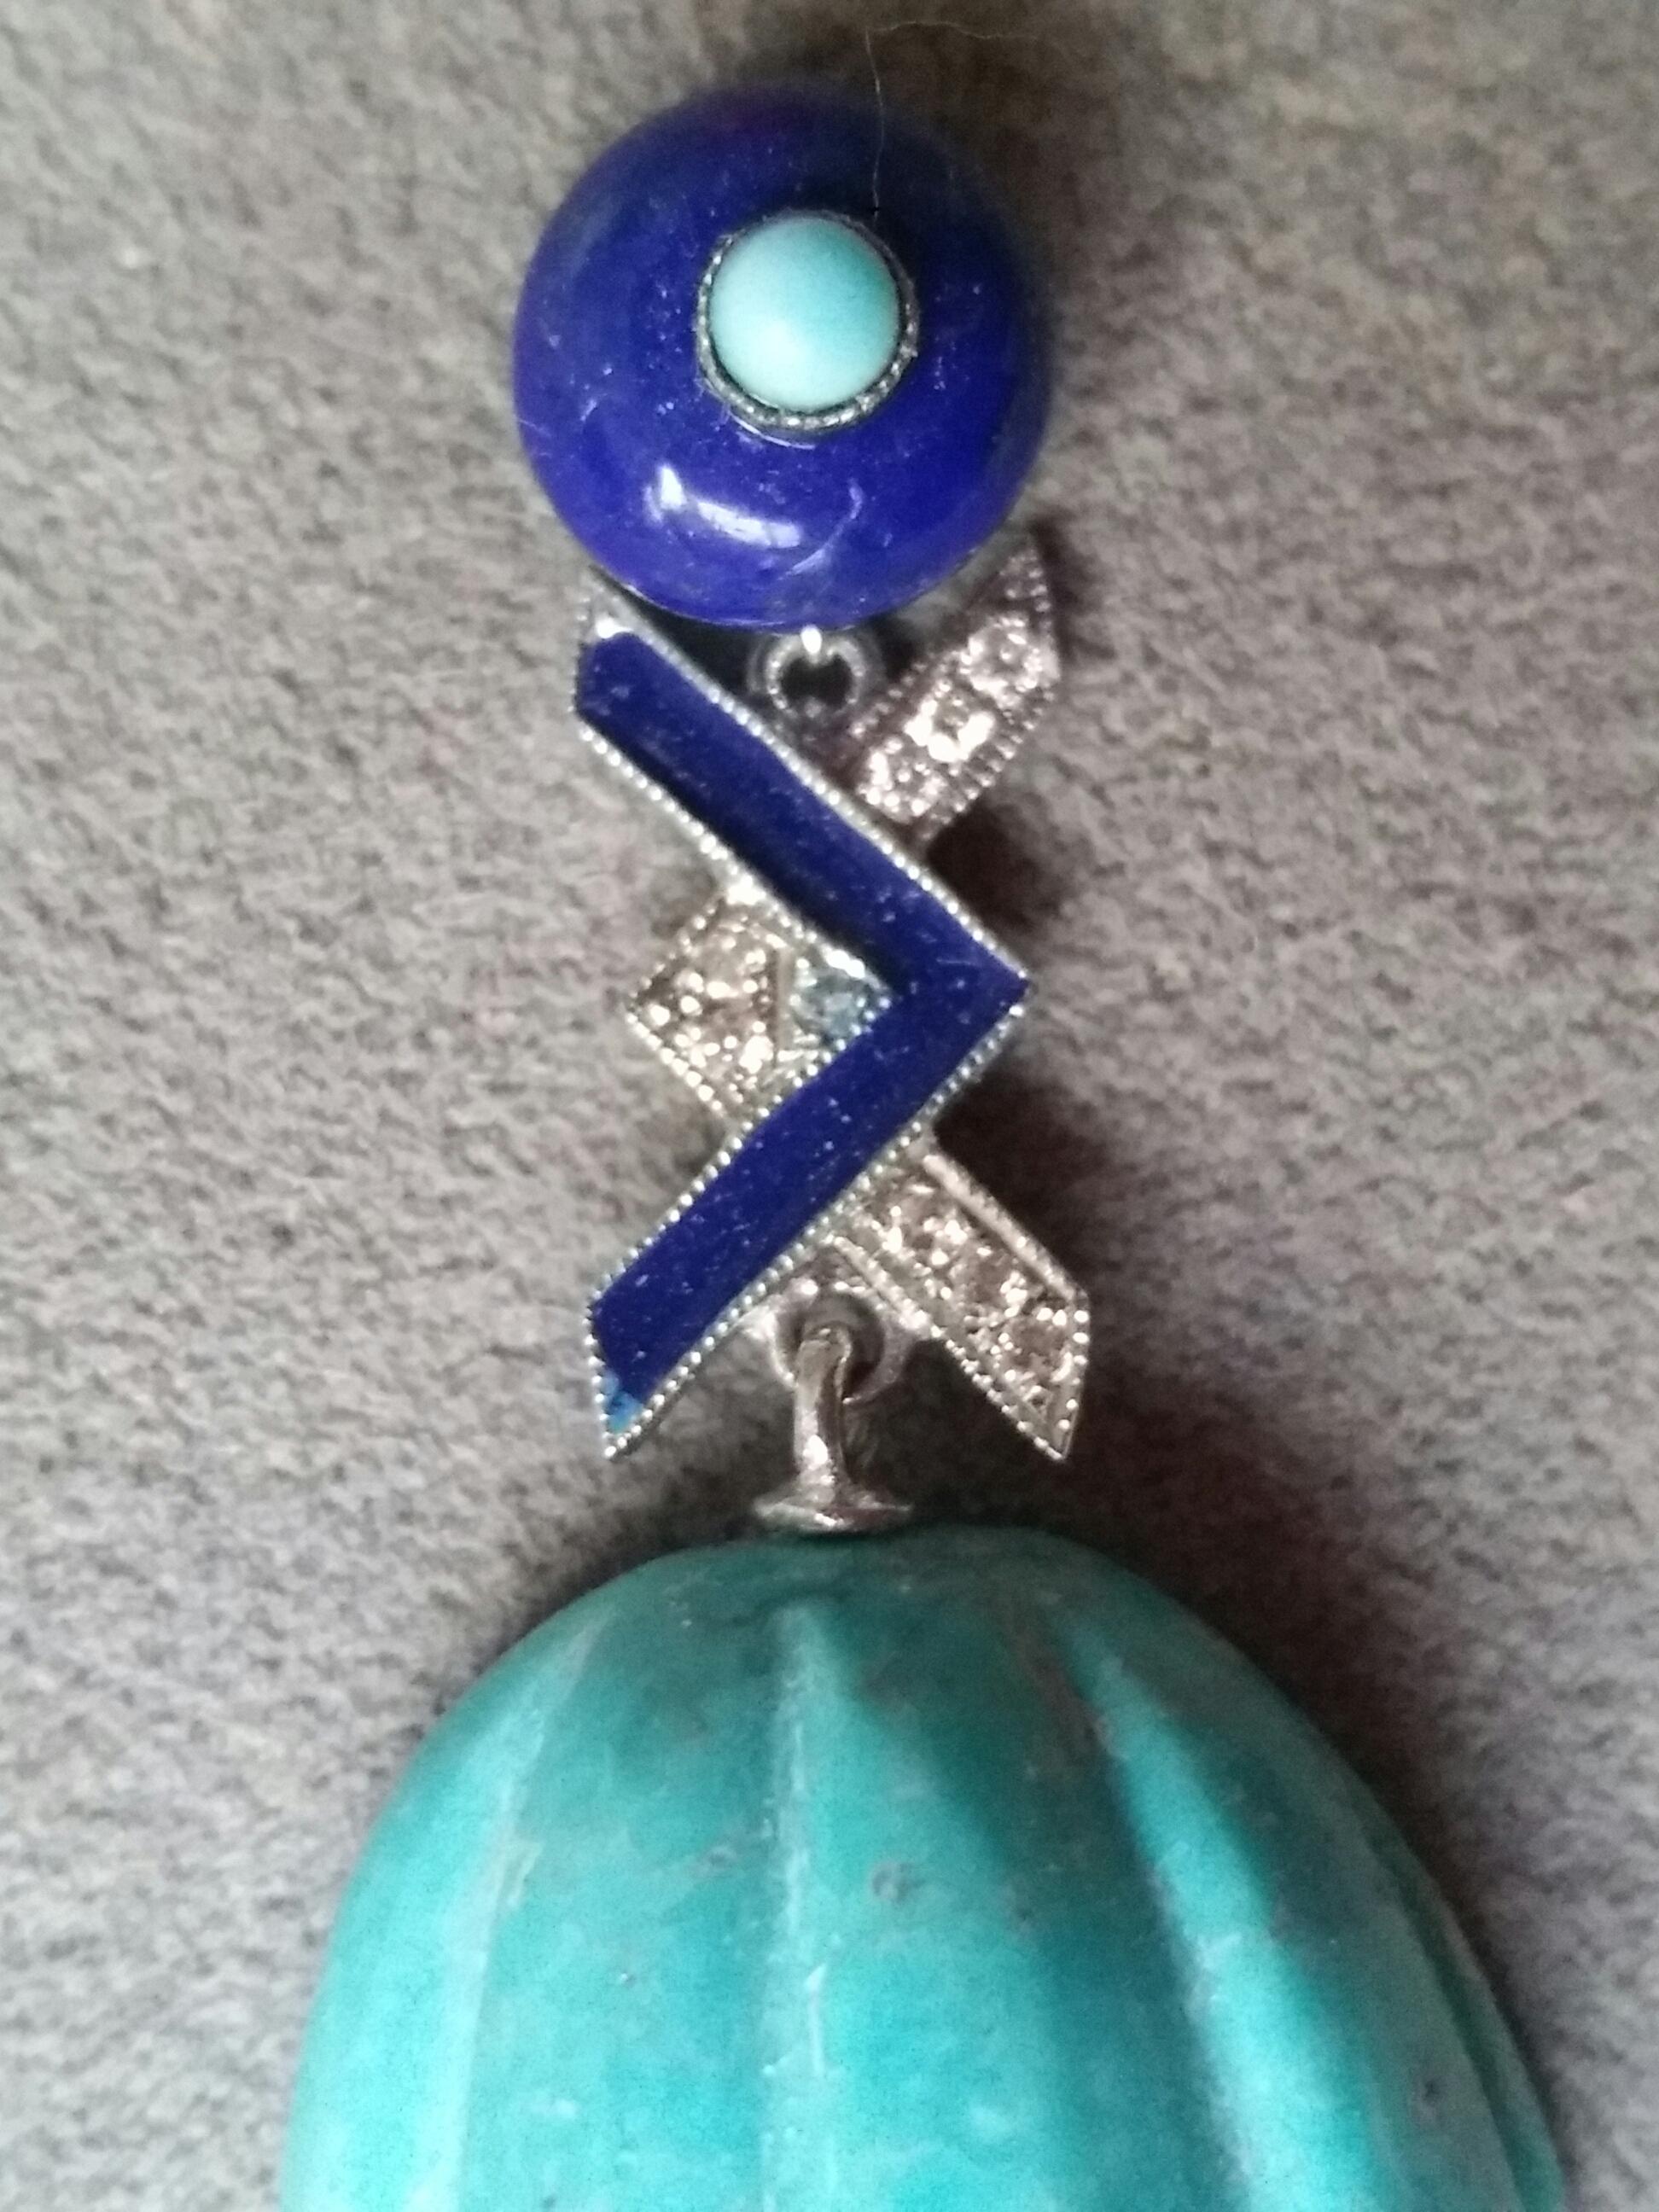 Tops are 2 round Lapis Lazuli of 8 mm in diameter with a small turquoise round cab in the center,middle parts are in white gold,diamonds and blue enamel,bottom parts are 2 Genuine Turquoise carved drops
Length 43 mm
Width  19 mm
Weight 13 grams
In